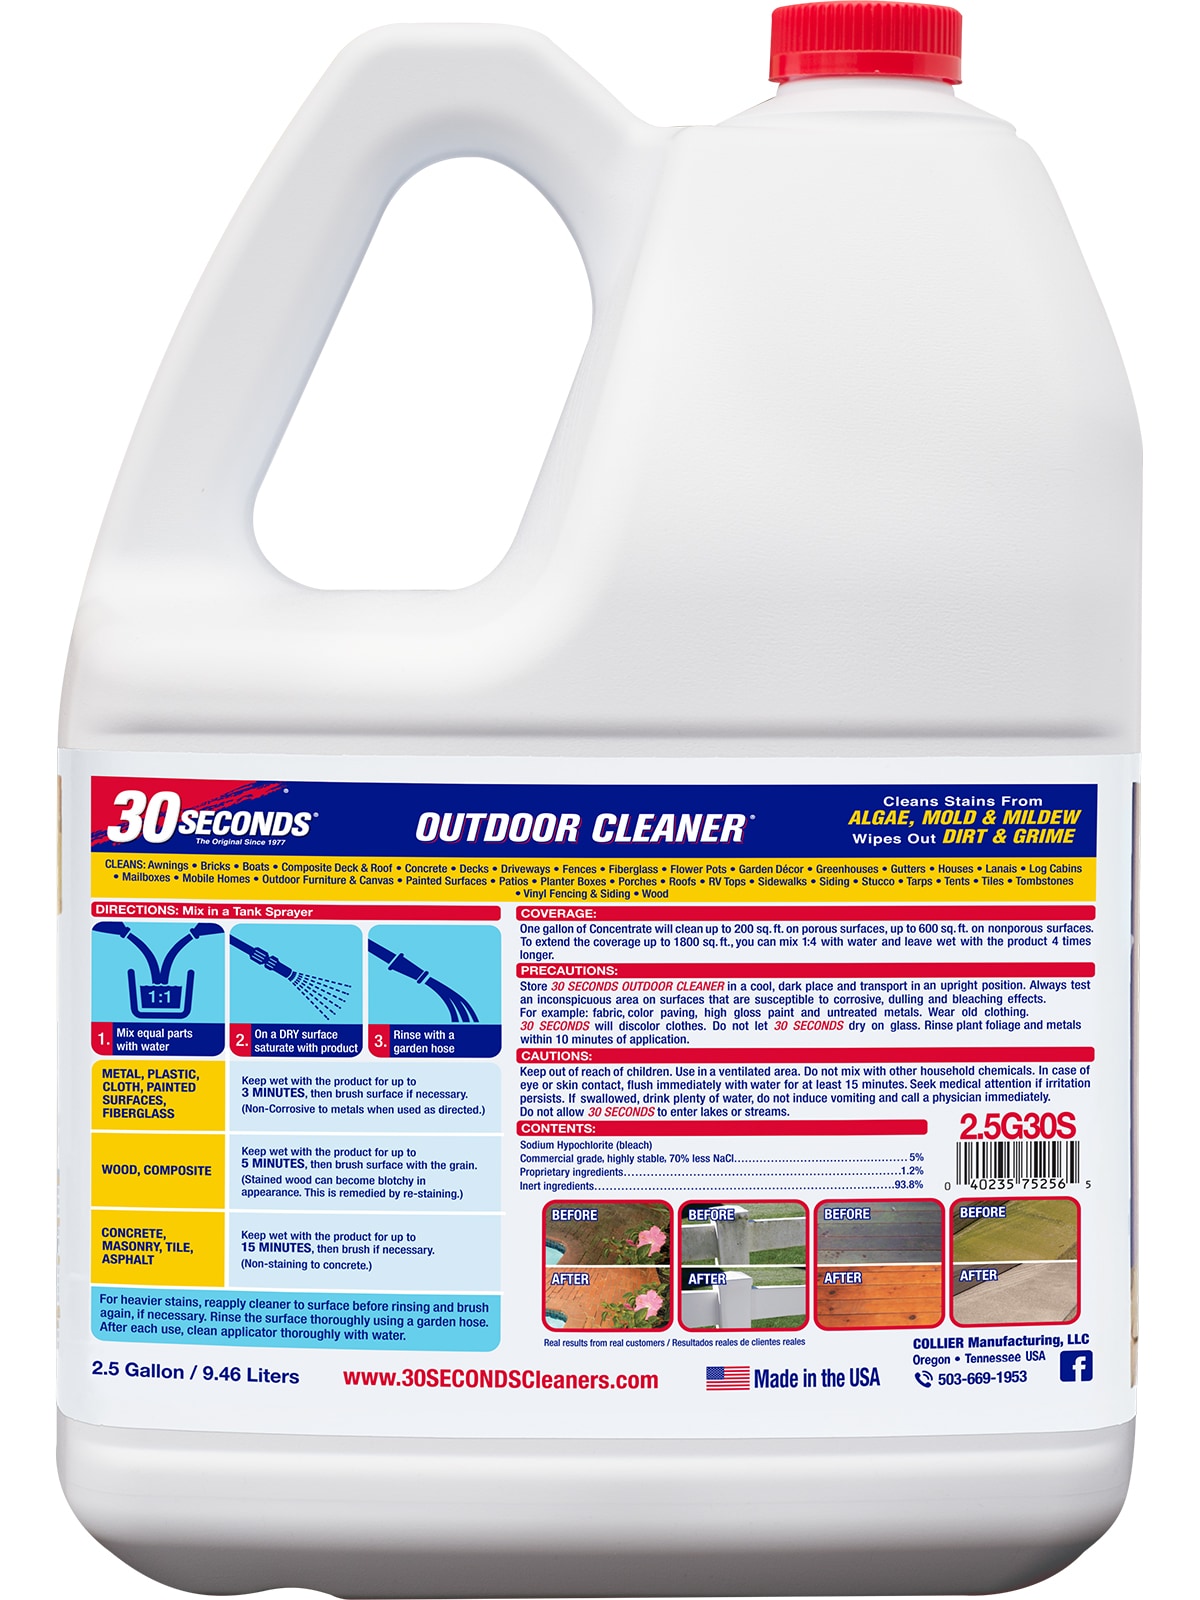 30 SECONDS 2.5-Gallon Mold and Mildew Stain Remover Concentrated Outdoor  Cleaner